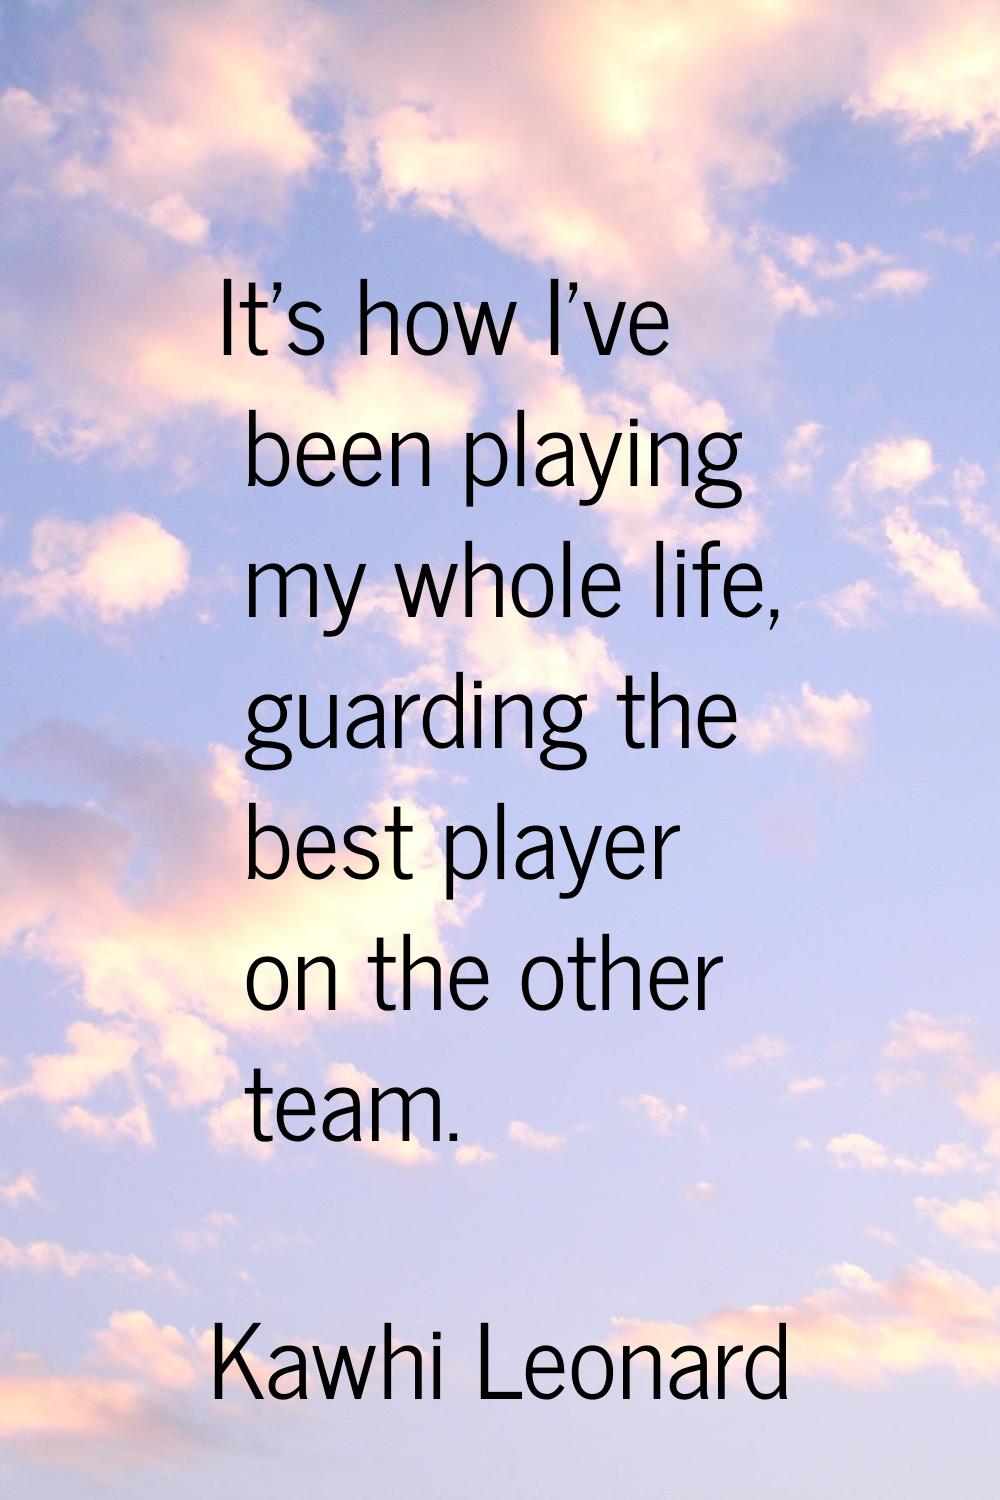 It's how I've been playing my whole life, guarding the best player on the other team.